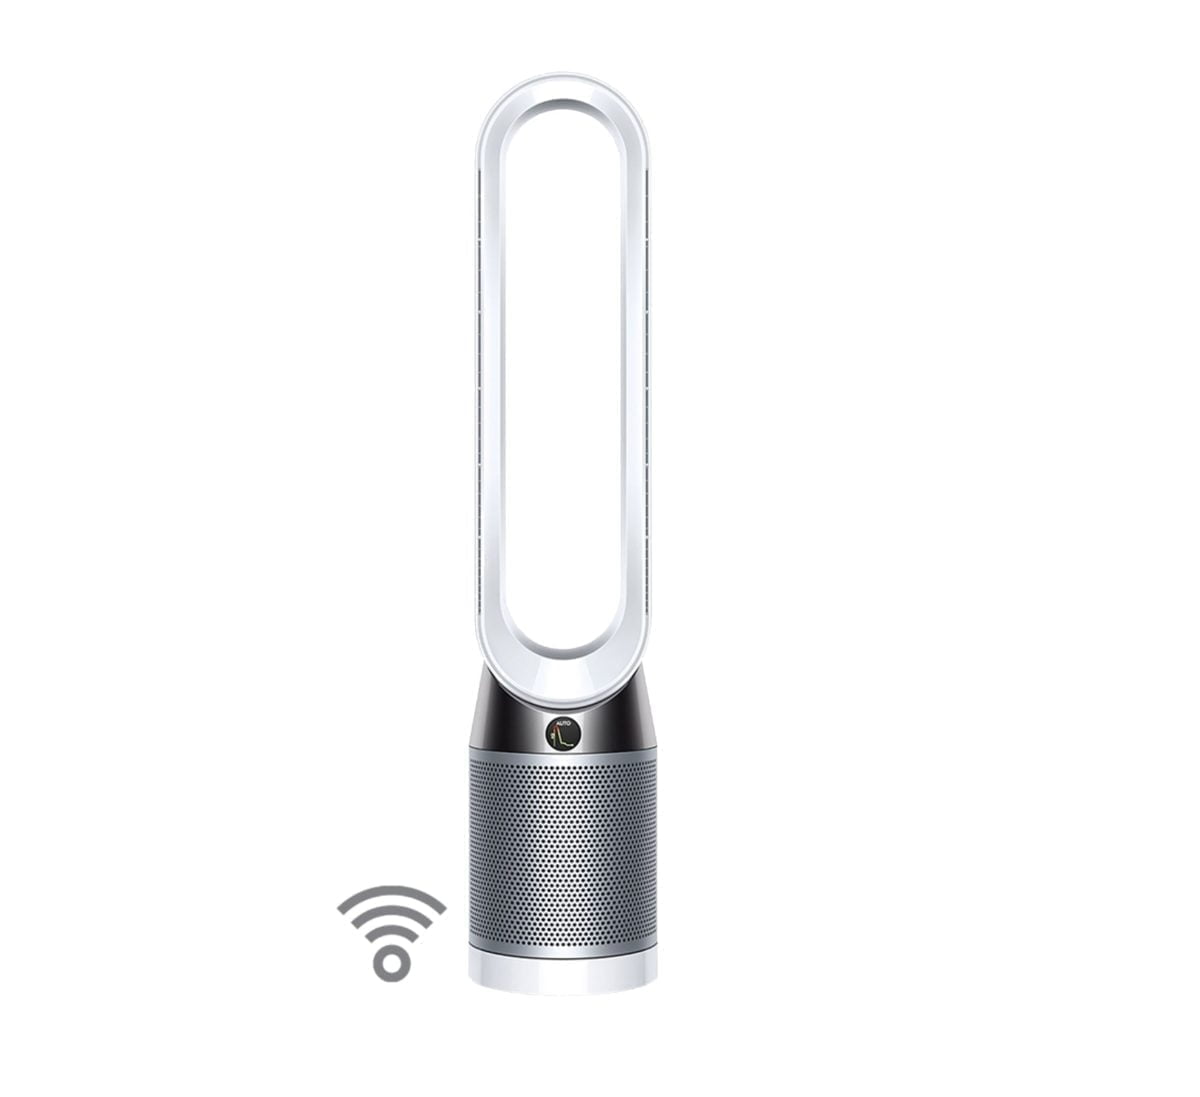 6192408 Sd [Video Width=&Amp;Quot;960&Amp;Quot; Height=&Amp;Quot;540&Amp;Quot; Mp4=&Amp;Quot;Https://Lablaab.com/Wp-Content/Uploads/2020/10/Dyson-Pure-Cool.mp4&Amp;Quot;][/Video] &Amp;Lt;Div Class=&Amp;Quot;Specs-Table Col-Xs-9&Amp;Quot;&Amp;Gt;&Amp;Lt;/Div&Amp;Gt; &Amp;Lt;Div&Amp;Gt; Product Name: Tp04 Pure Cool Tower 800 Sq. Ft. Air Purifier Brand: Dyson Model Number: 310124-01 Color: White/Silver Color Category: Silver Dyson International Warranty &Amp;Lt;/Div&Amp;Gt; Dyson - Tp04 Pure Cool Tower Dyson - Tp04 Pure Cool Tower 800 Sq. Ft. Air Purifier - White/Silver